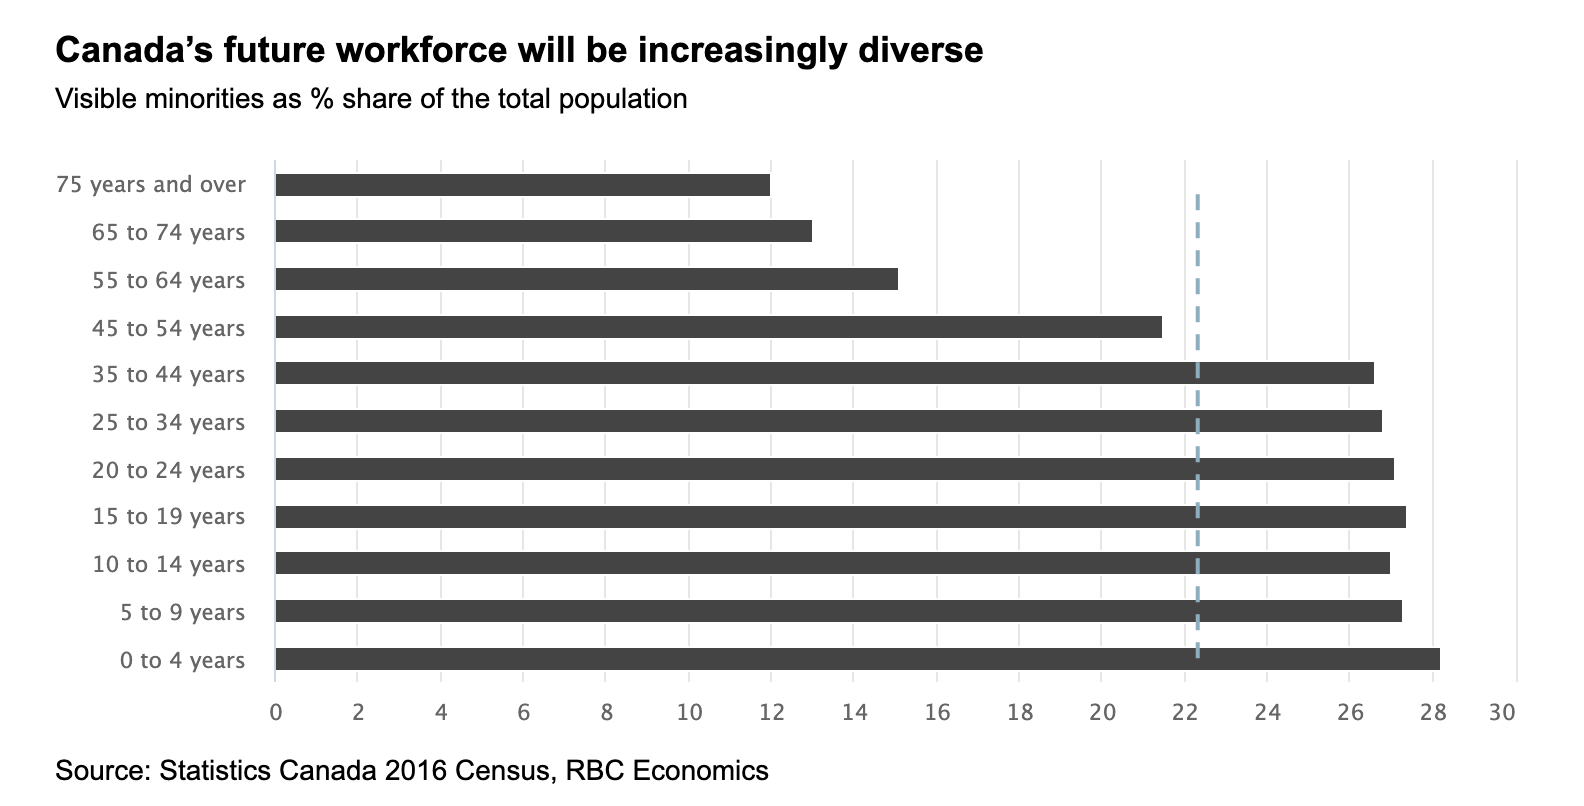 Canada's future workforce will be increasing with diversity